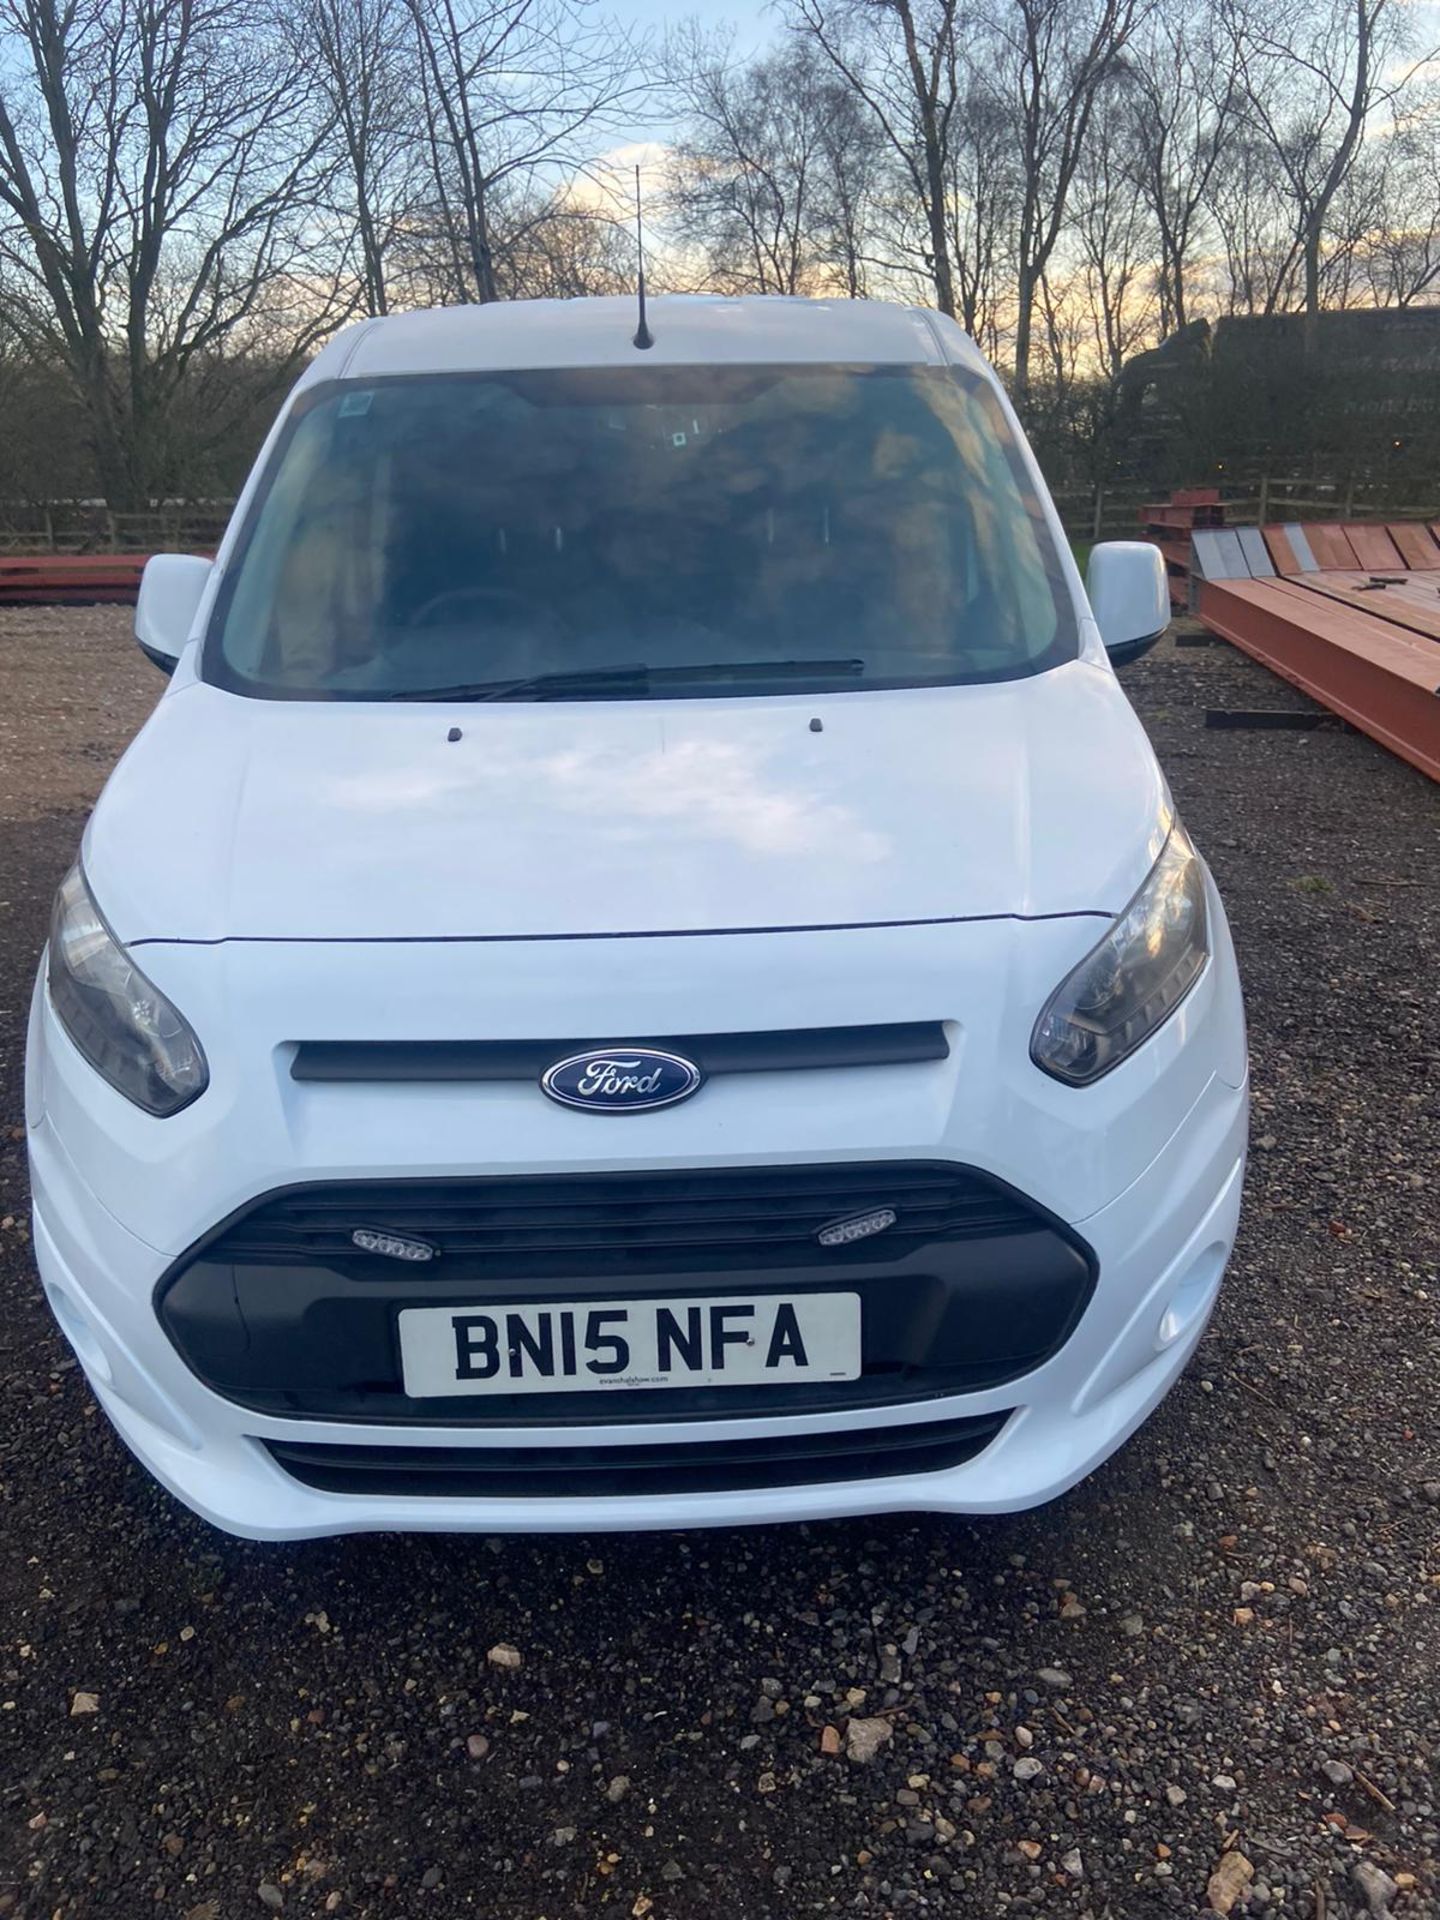 2015/15 REG FORD TRANSIT CONNECT 200 ECONETIC 1.6 DIESEL WHITE PANEL VAN, SHOWING 0 FORMER KEEPERS - Image 2 of 11